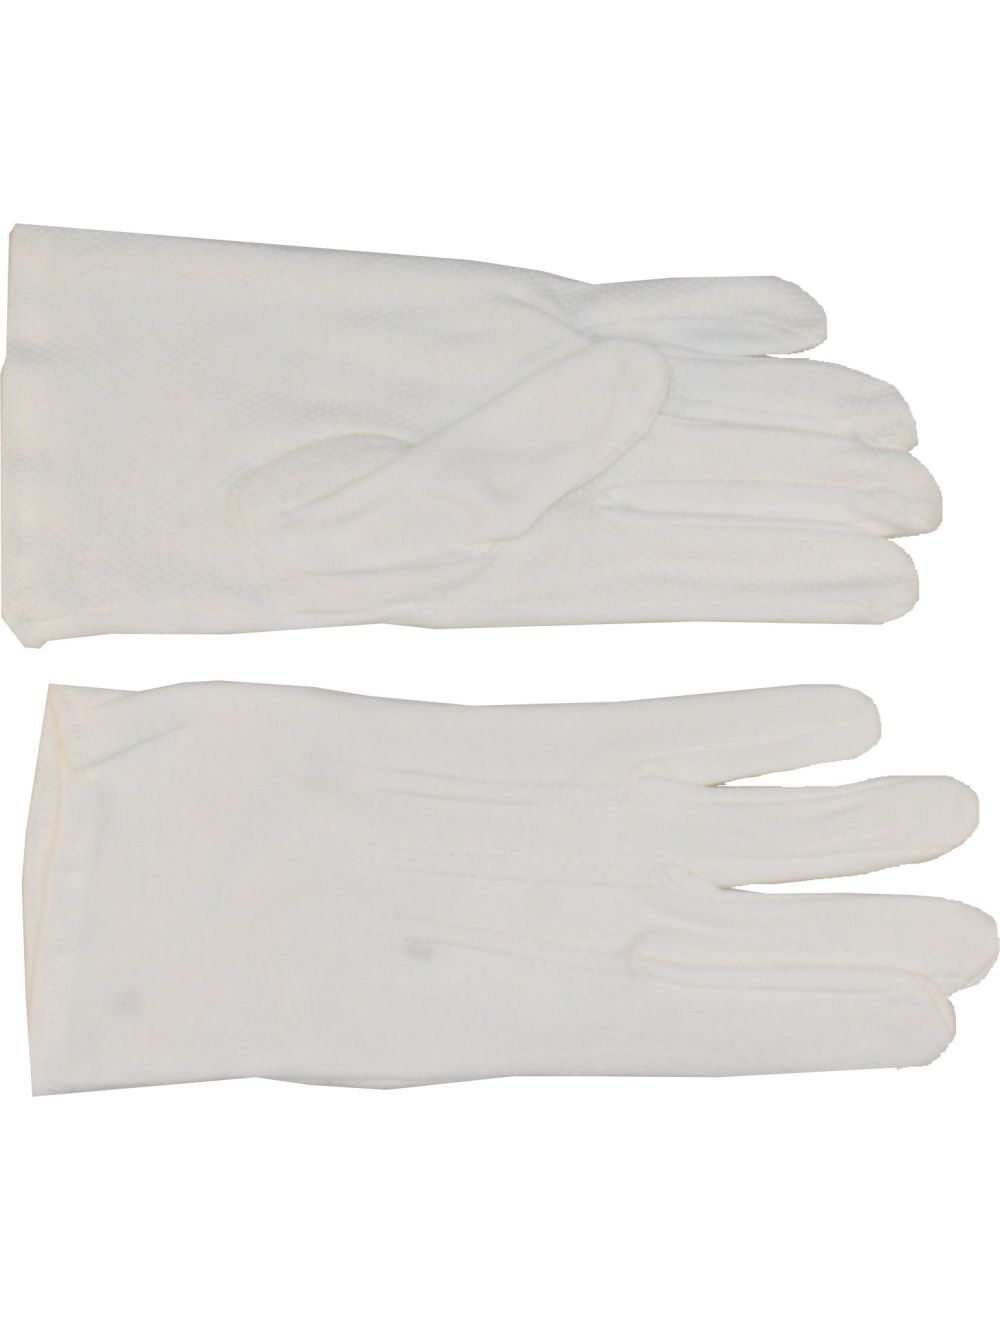 Parade Slip-On Gloves - Grip Dots w/ Raised Pointing - White